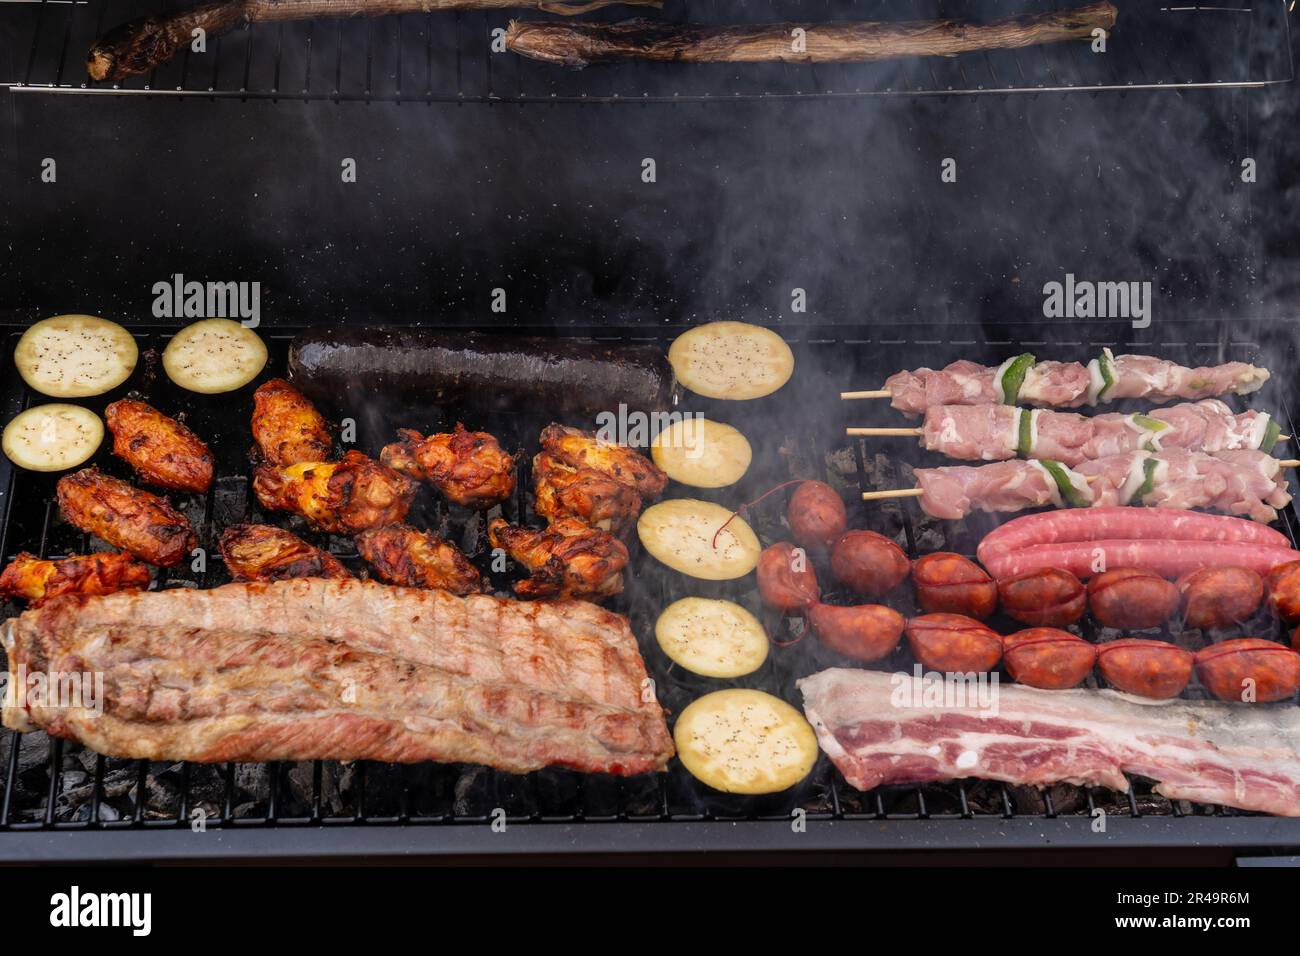 An outdoor barbecue grill with a variety of meats and vegetables cooked on its hot surface Stock Photo